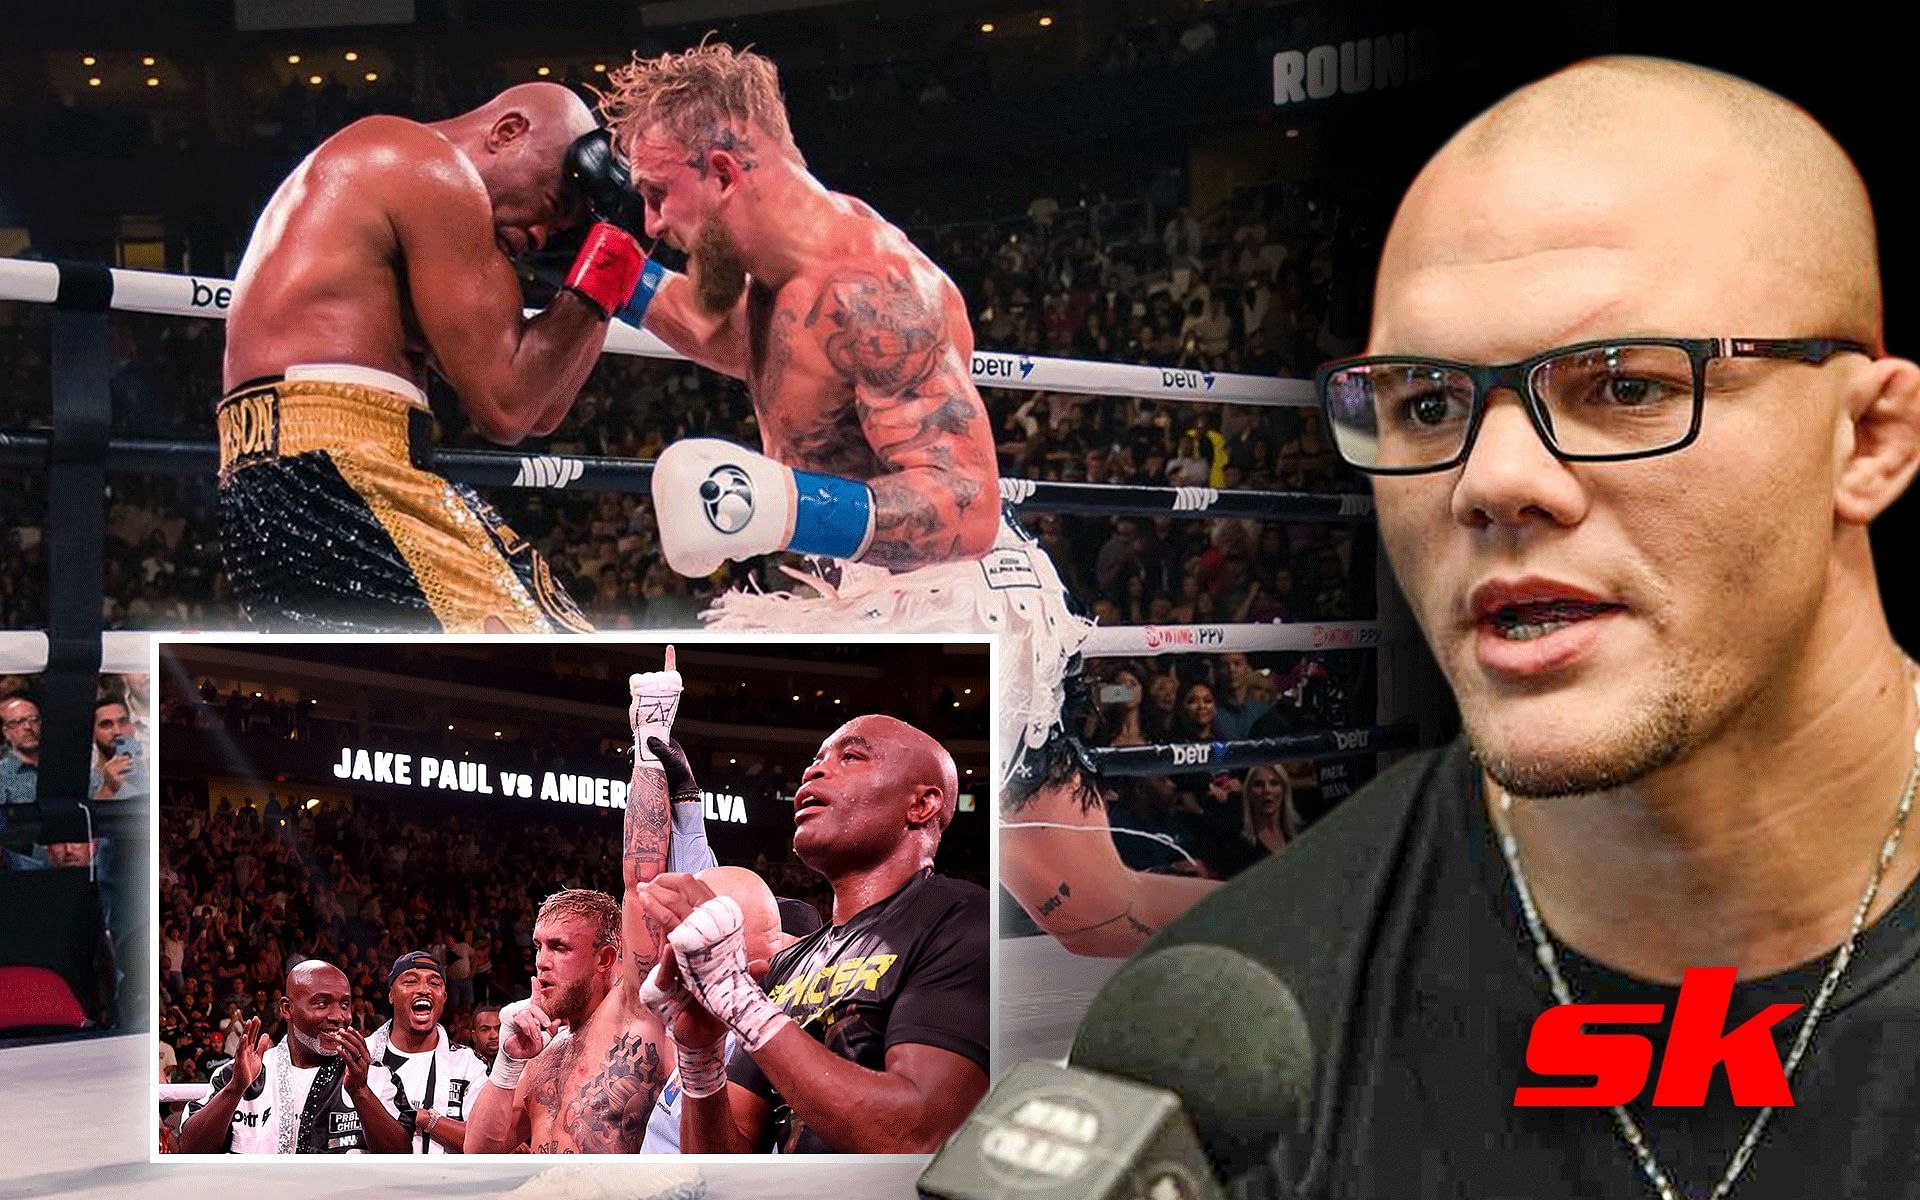 When Anthony Smith called fighters to boycott Jake Paul if he beats Anderson Silva [Images via: @lionheartasmith and @jakepaul on Instagram]